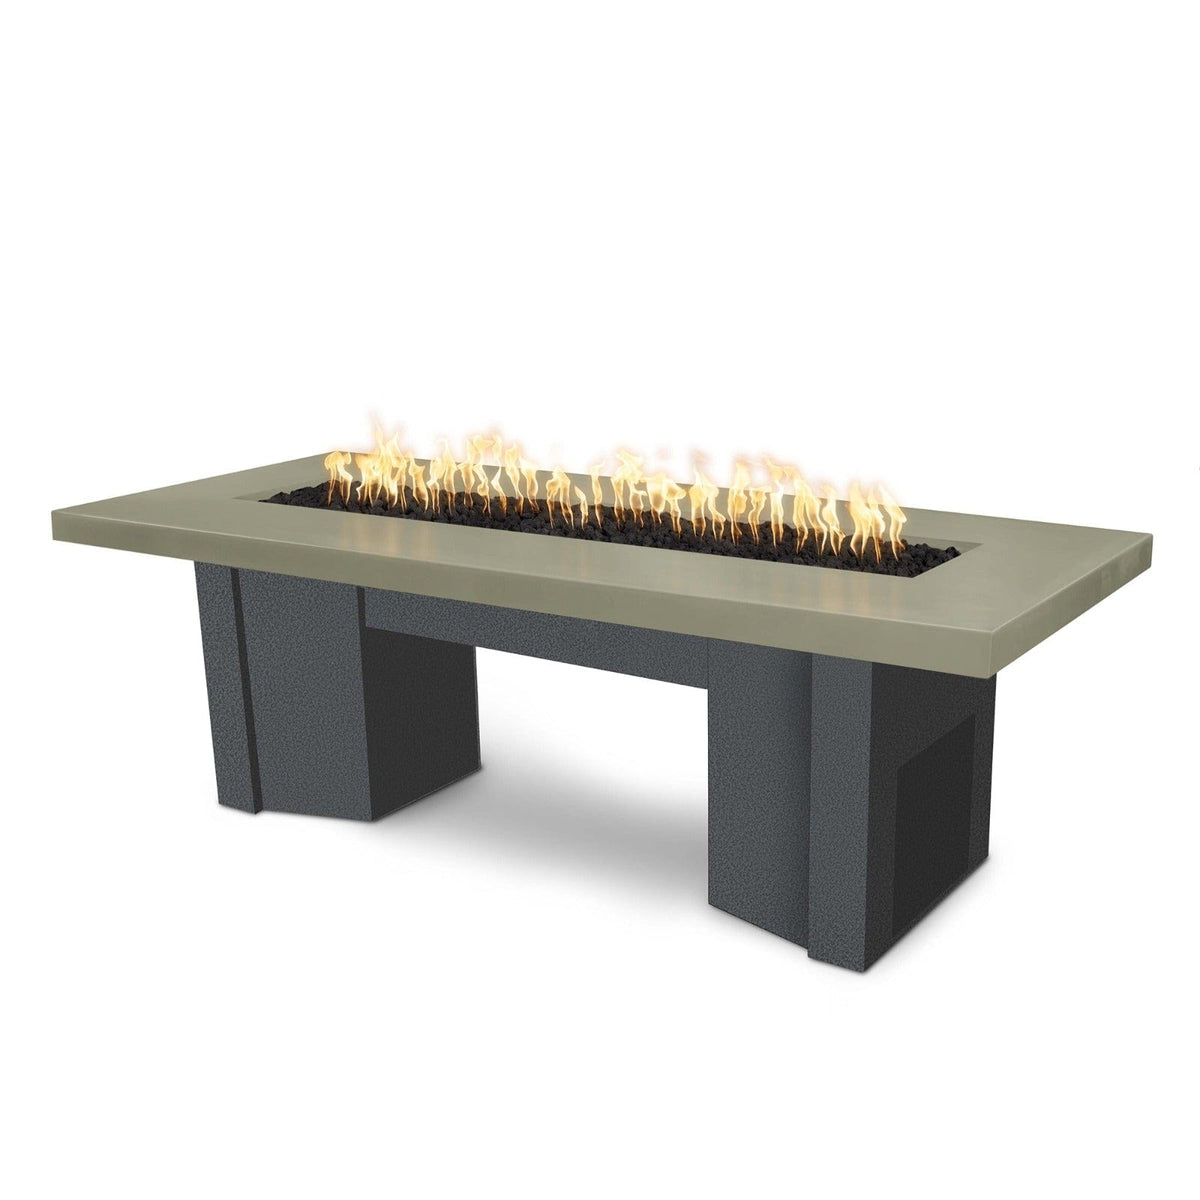 The Outdoor Plus Fire Features Ash (-ASH) / Silver Vein Powder Coated Steel (-SLV) The Outdoor Plus 60&quot; Alameda Fire Table Smooth Concrete in Natural Gas - 110V Plug &amp; Play Electronic Ignition / OPT-ALMGFRC60EKIT-NG